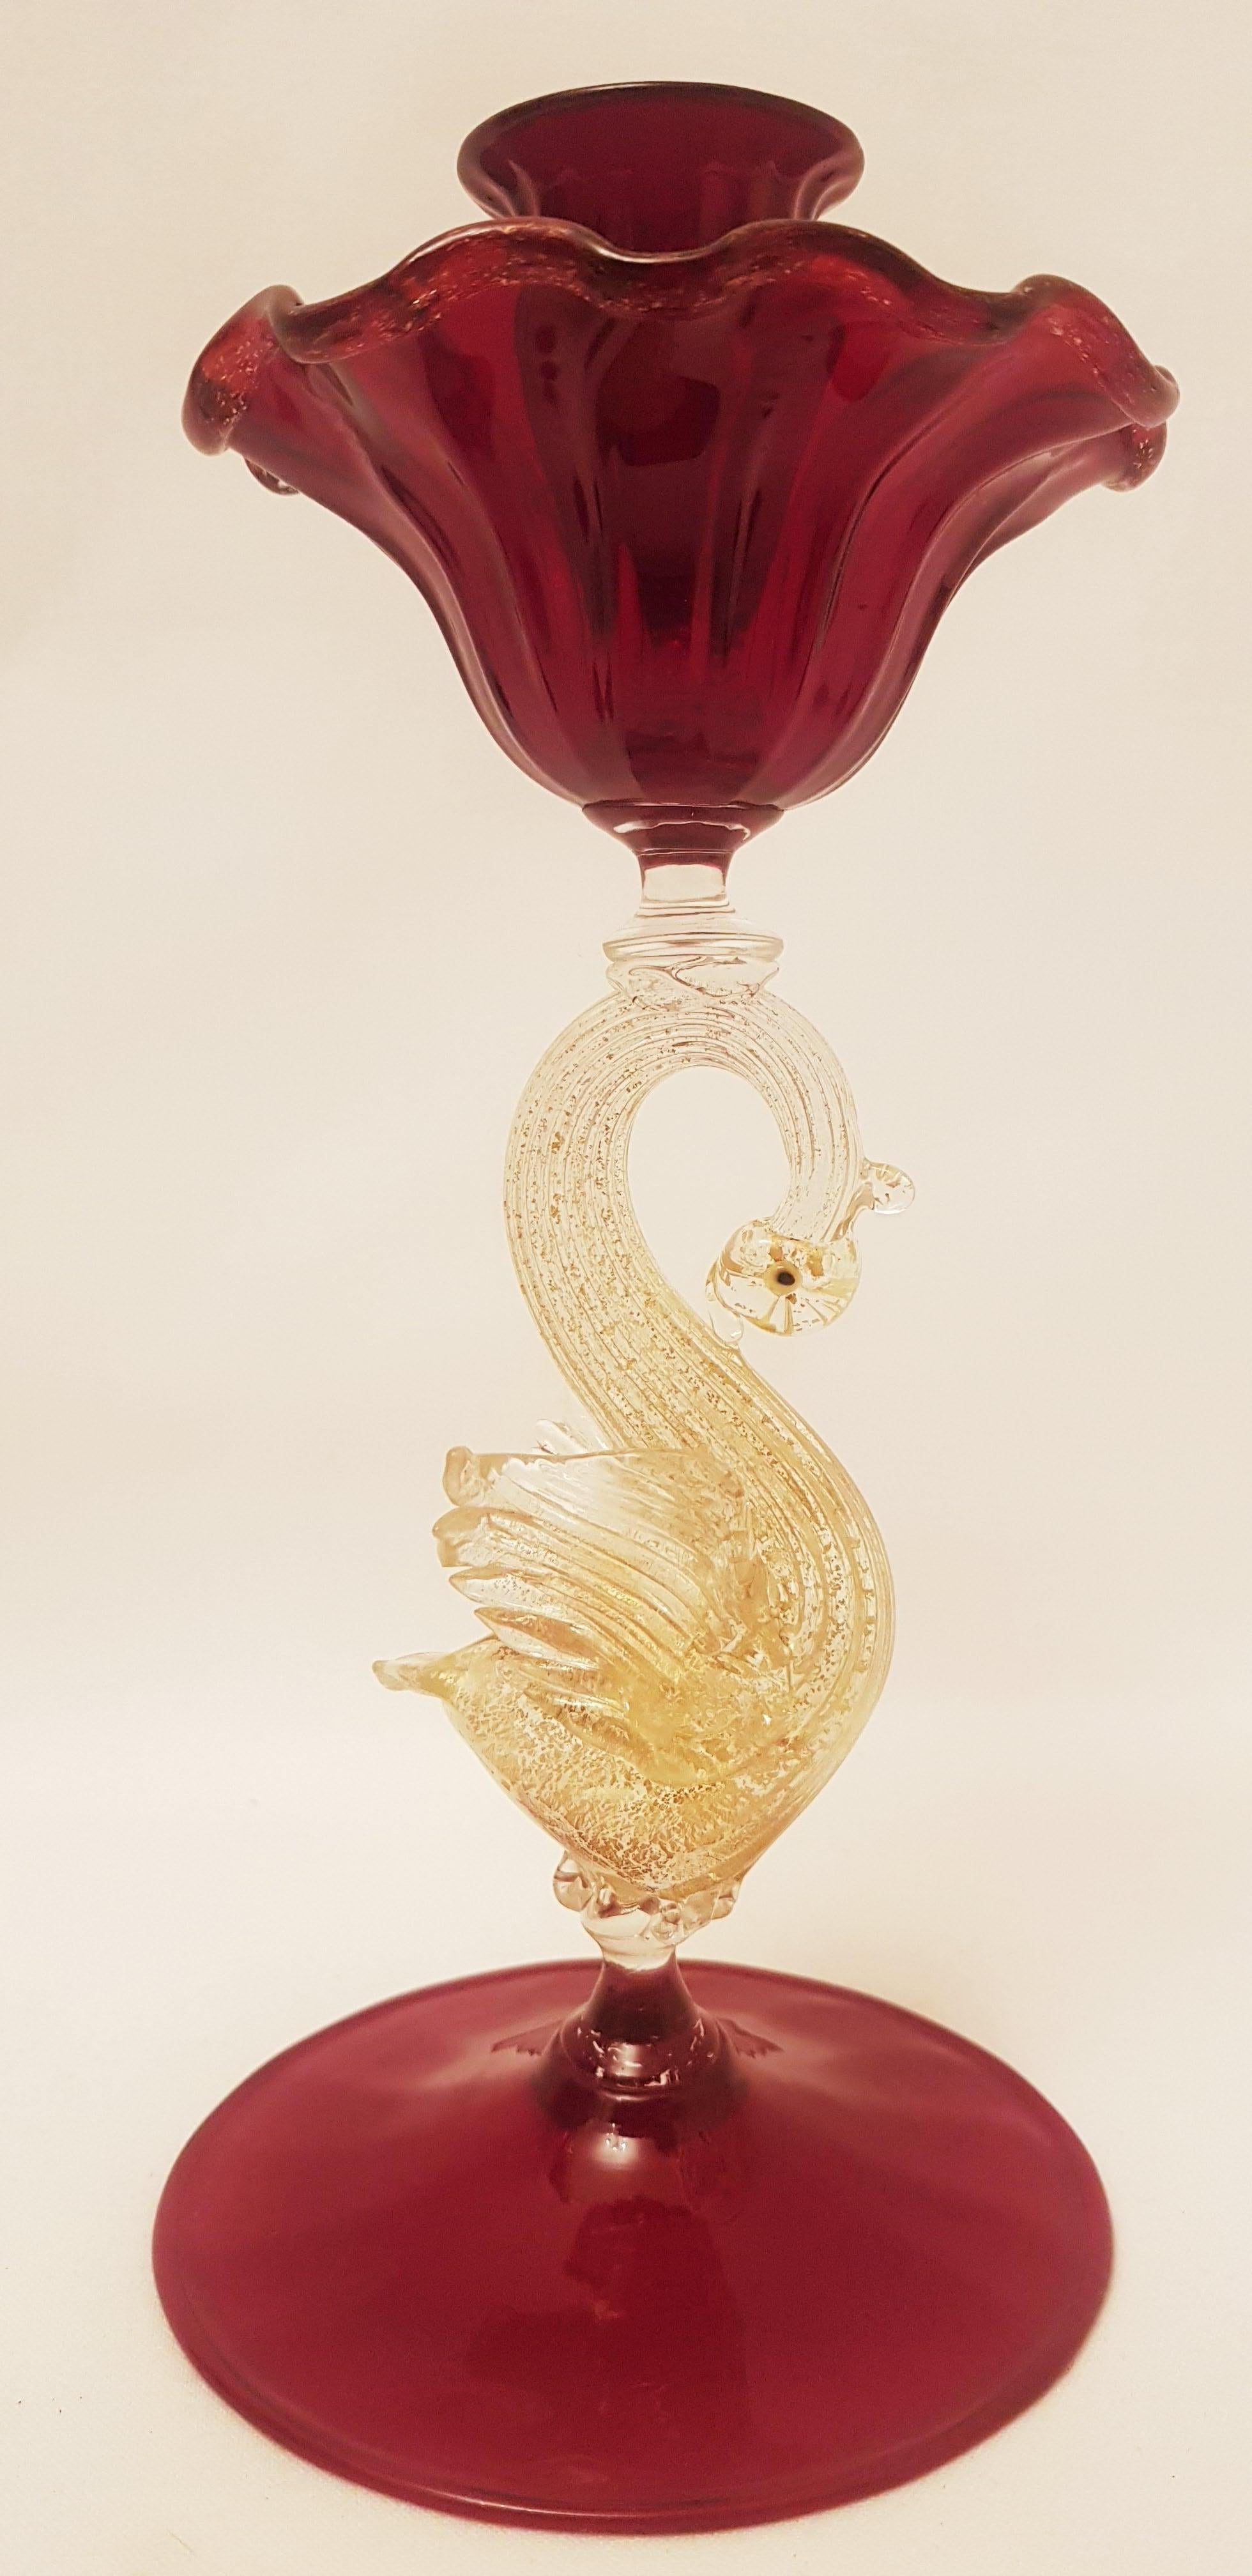 Beautiful antique Murano red swirled glass candleholder with gold leaf, made in Vetri Salviati in years 1896-1910 by Antonio Salviati. The large one is 21 cm tall and the smaller ones are 8 cm tall and 10 cm wide. All in excellent condition.